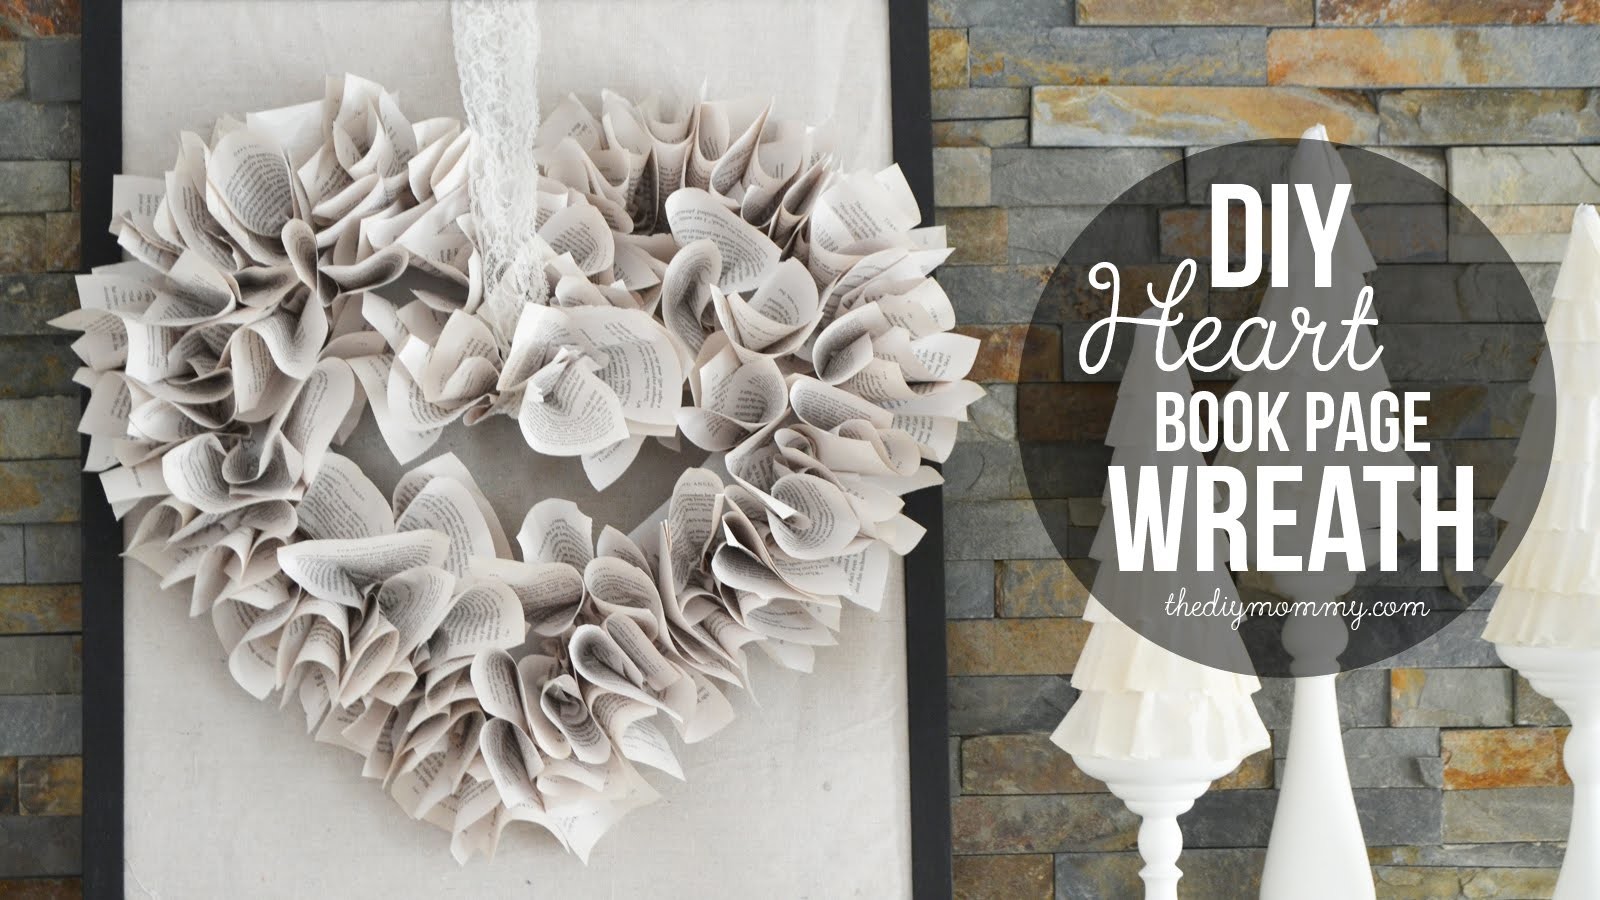 How to Make a Heart Shaped Book Page Wreath